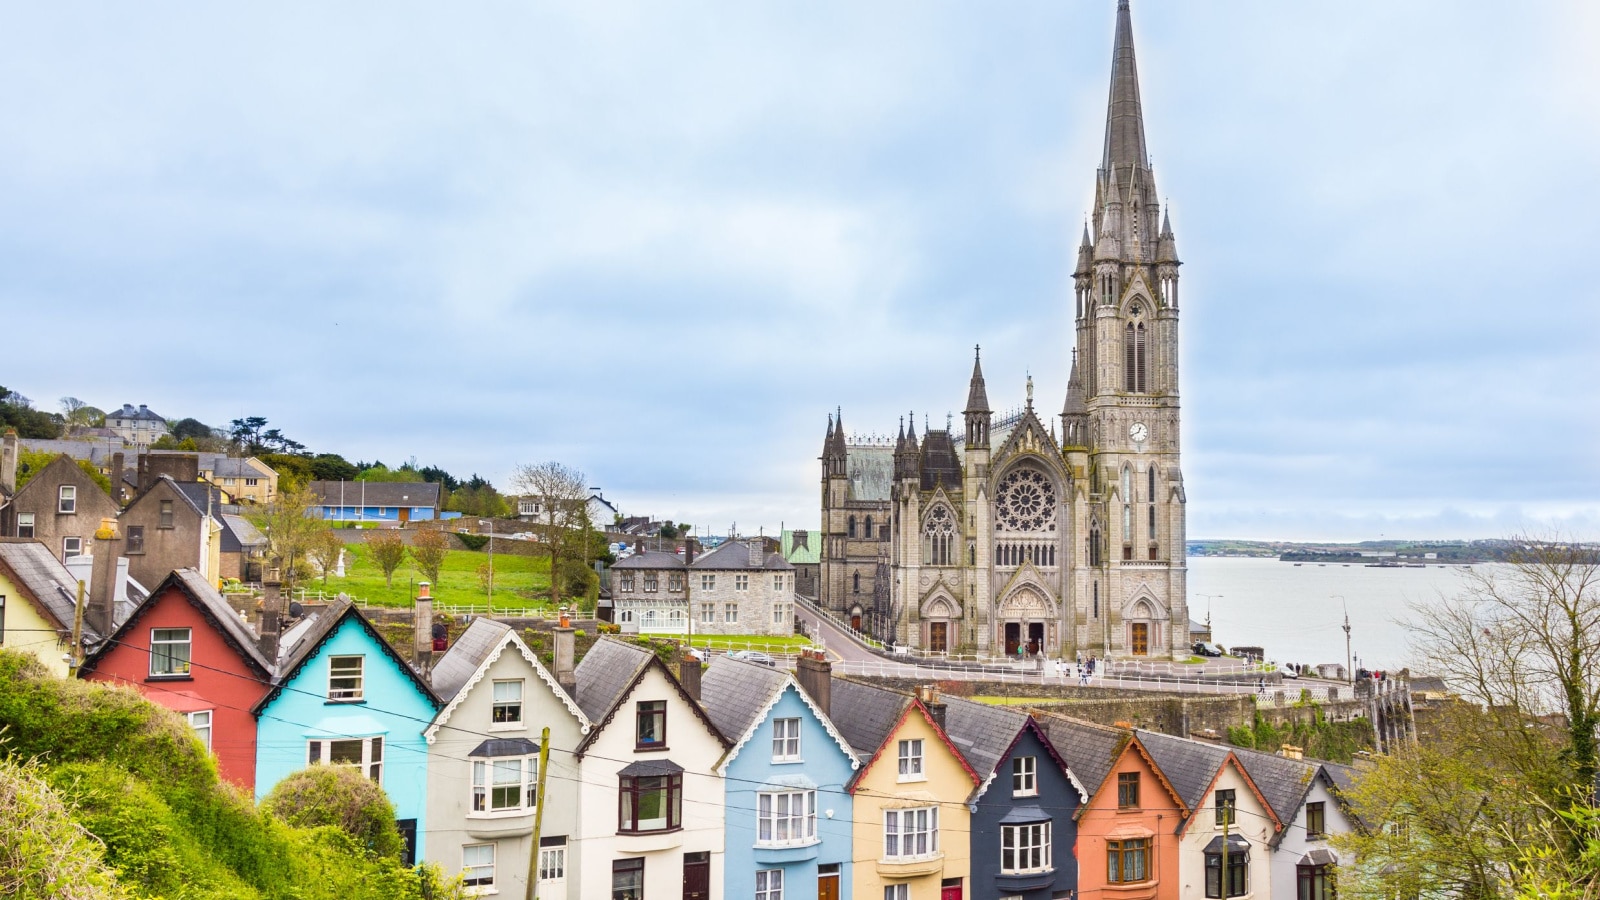 Cathedral and colored houses in Cobh, Ireland